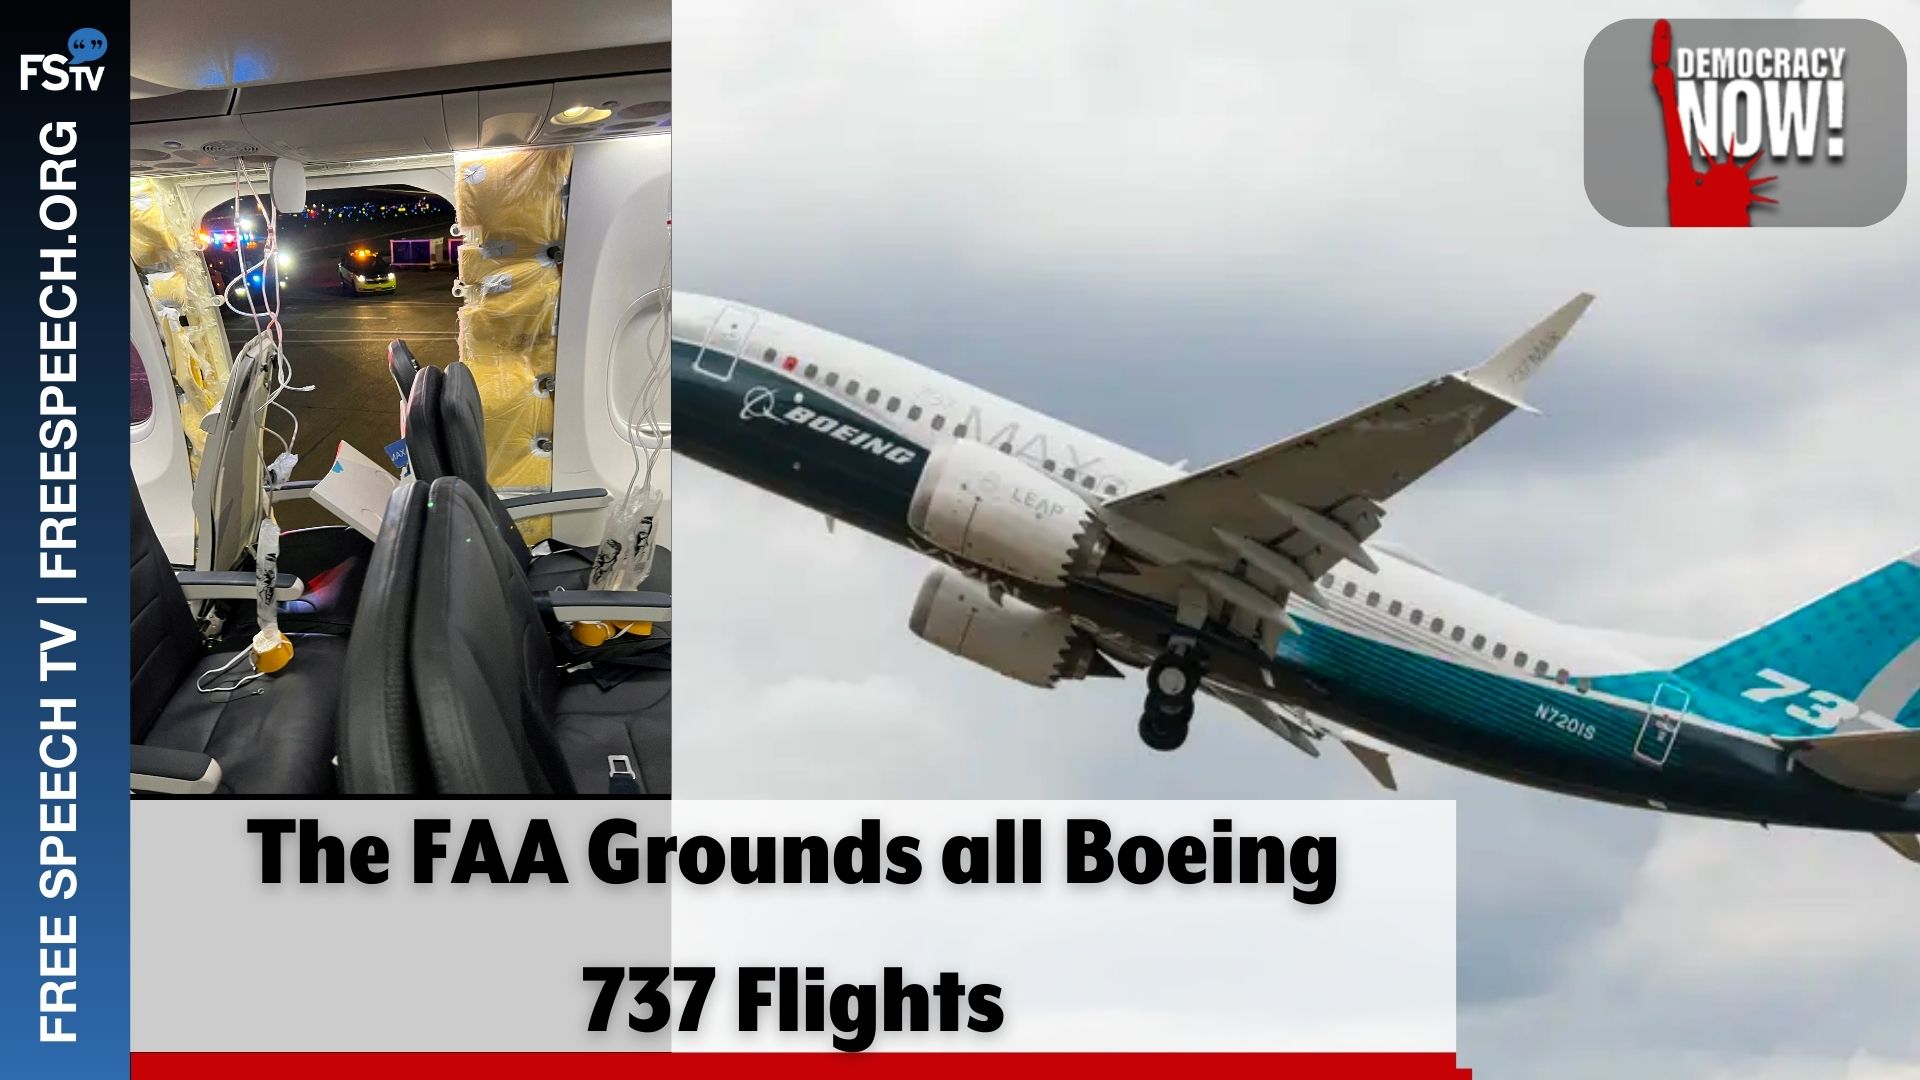 Democracy Now! The FAA Grounds all Boeing 737 Flights